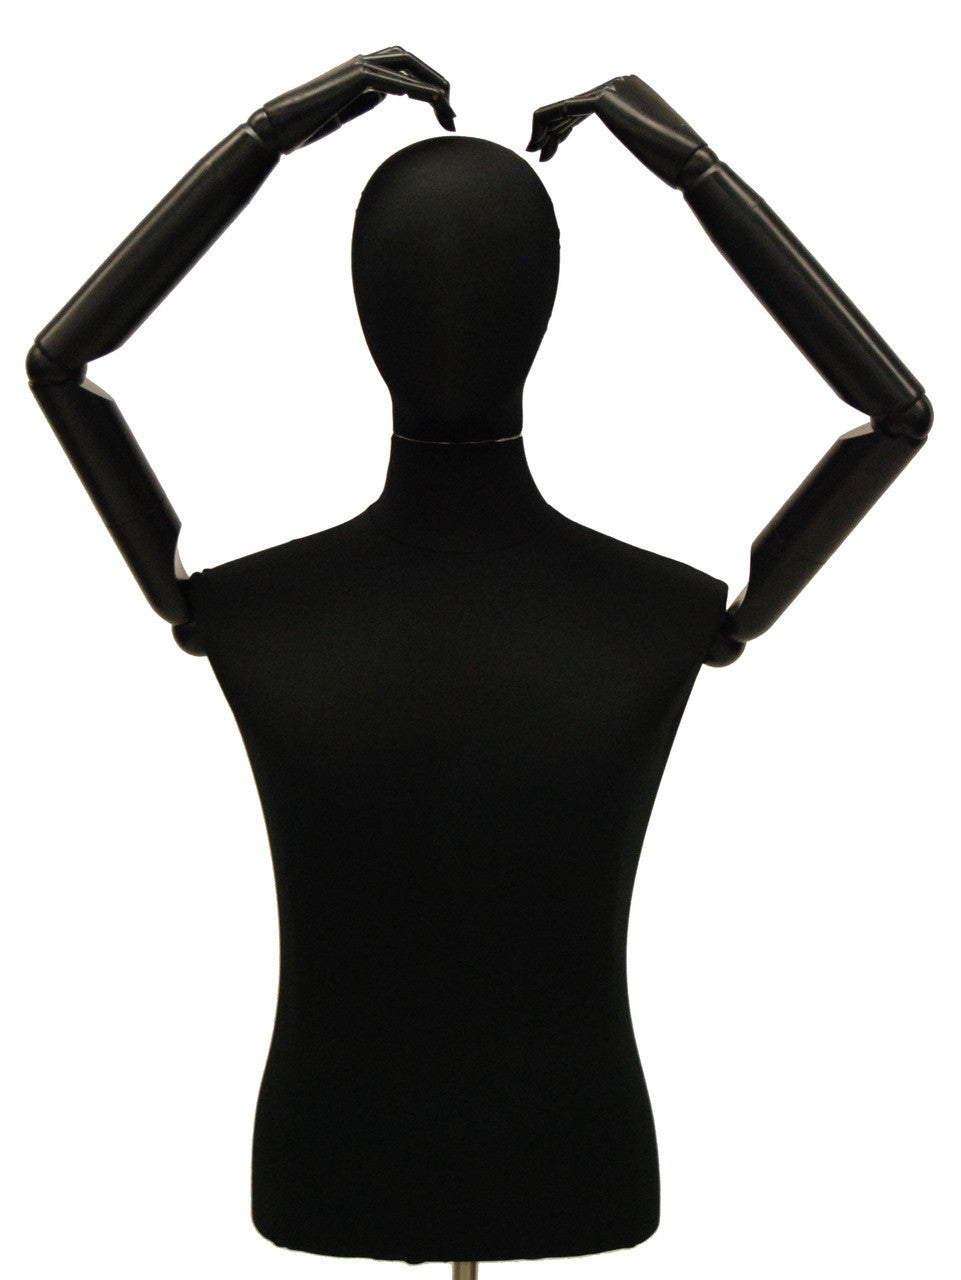 Male Dress Form with Bendable Arms: Black Jersey, Wheeled Base